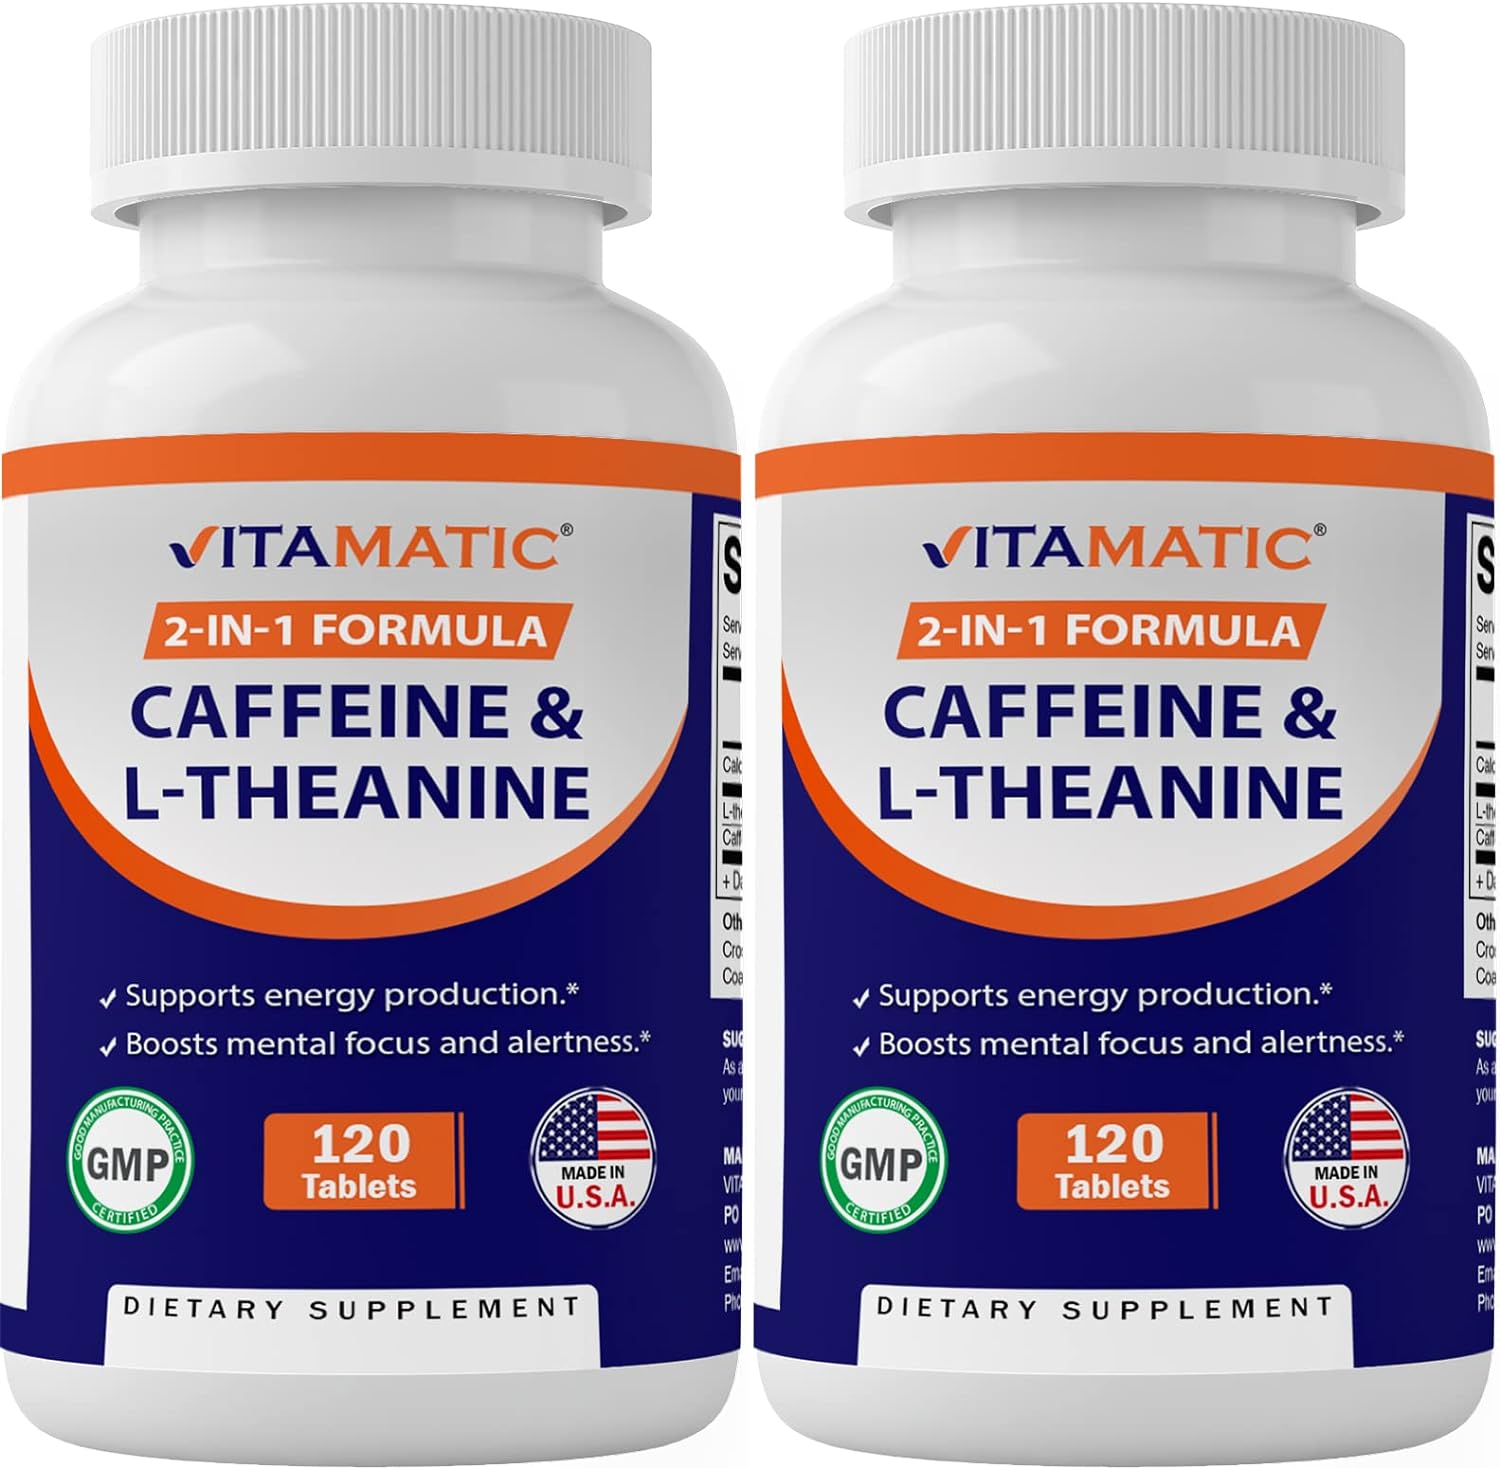 Vitamatic 2 Packs Caffeine Pills with L-Theanine - 300 mg per Tablet - 120 Vegetarian Tablets - Nootropic Supplement for Focused Energy (Total 240 Tablets)